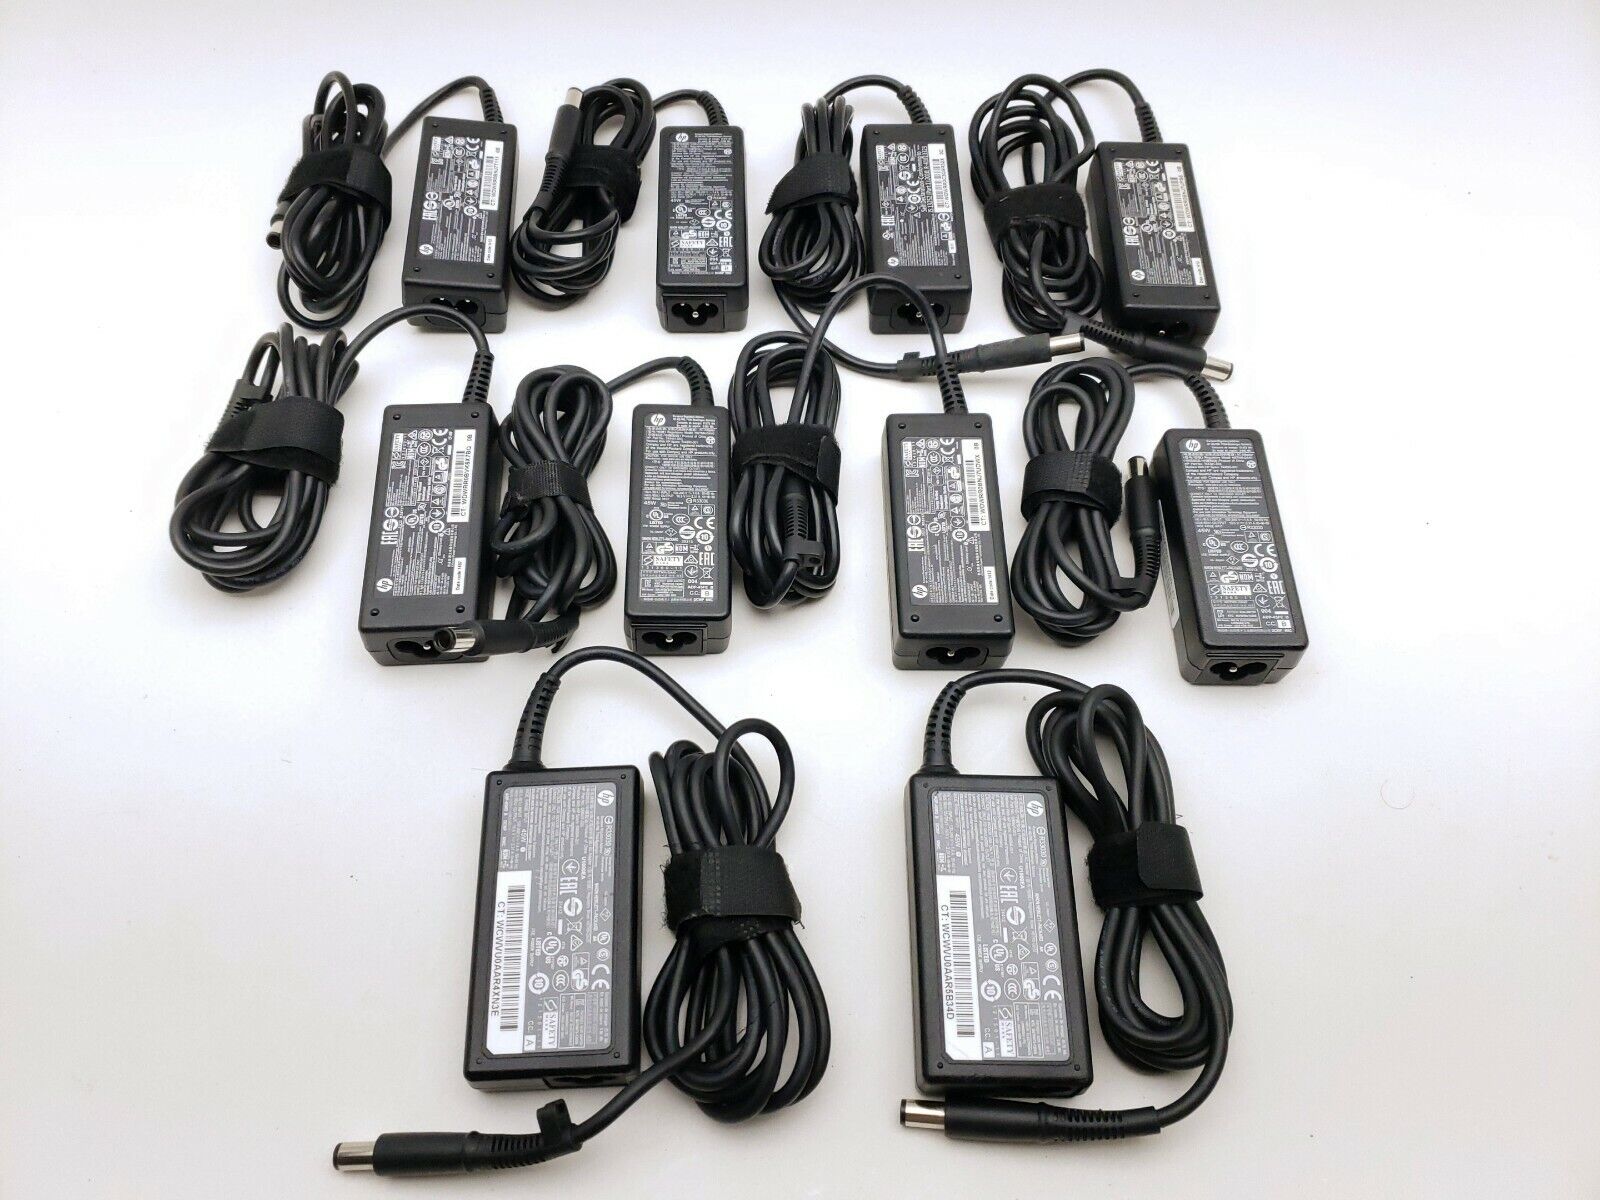 Lot of 10 HP Genuine AC Adapter Large Tip 19.5V 2.3A 45W 744481 744893